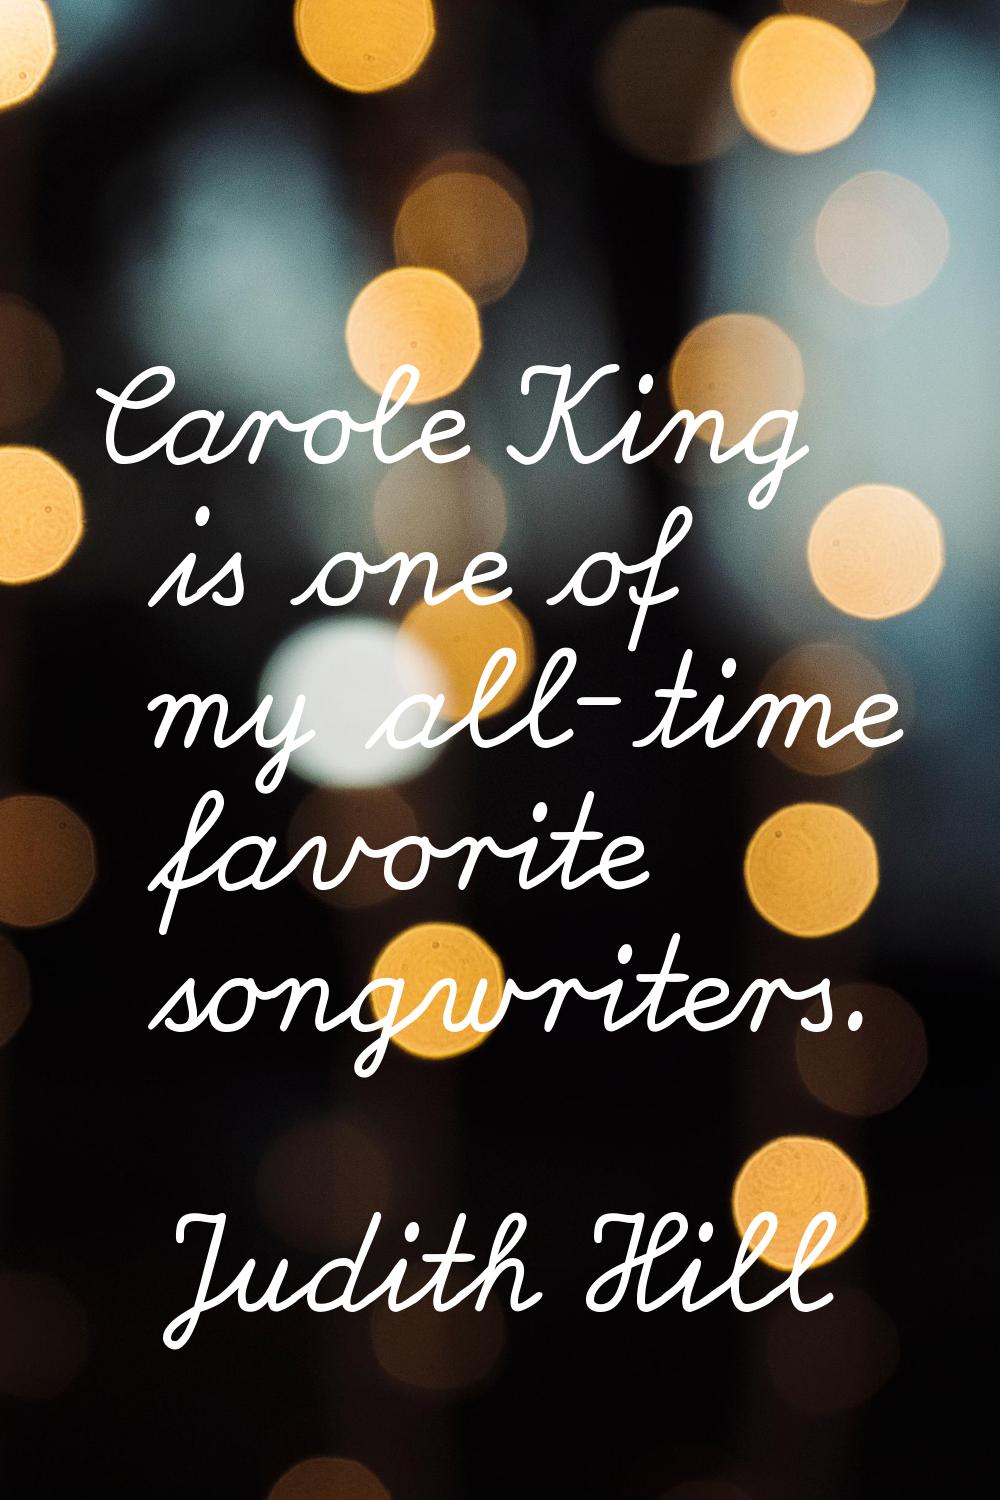 Carole King is one of my all-time favorite songwriters.